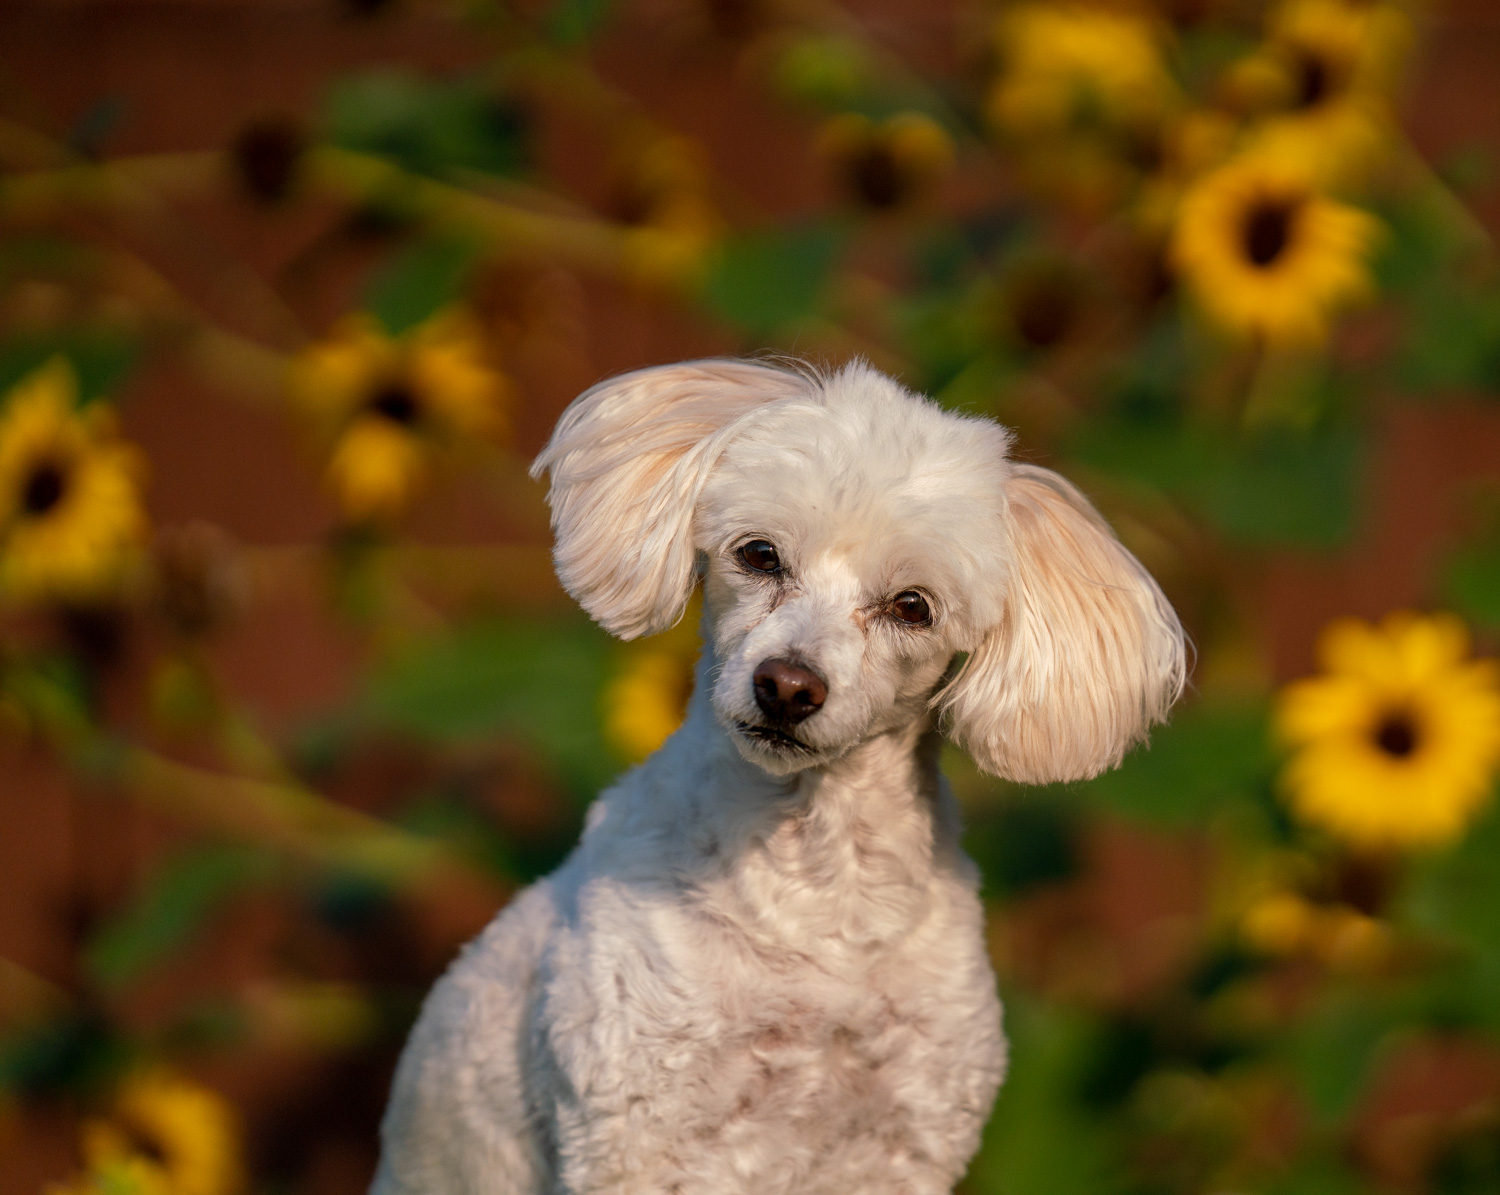 Bailey at sunrise with sunflowers